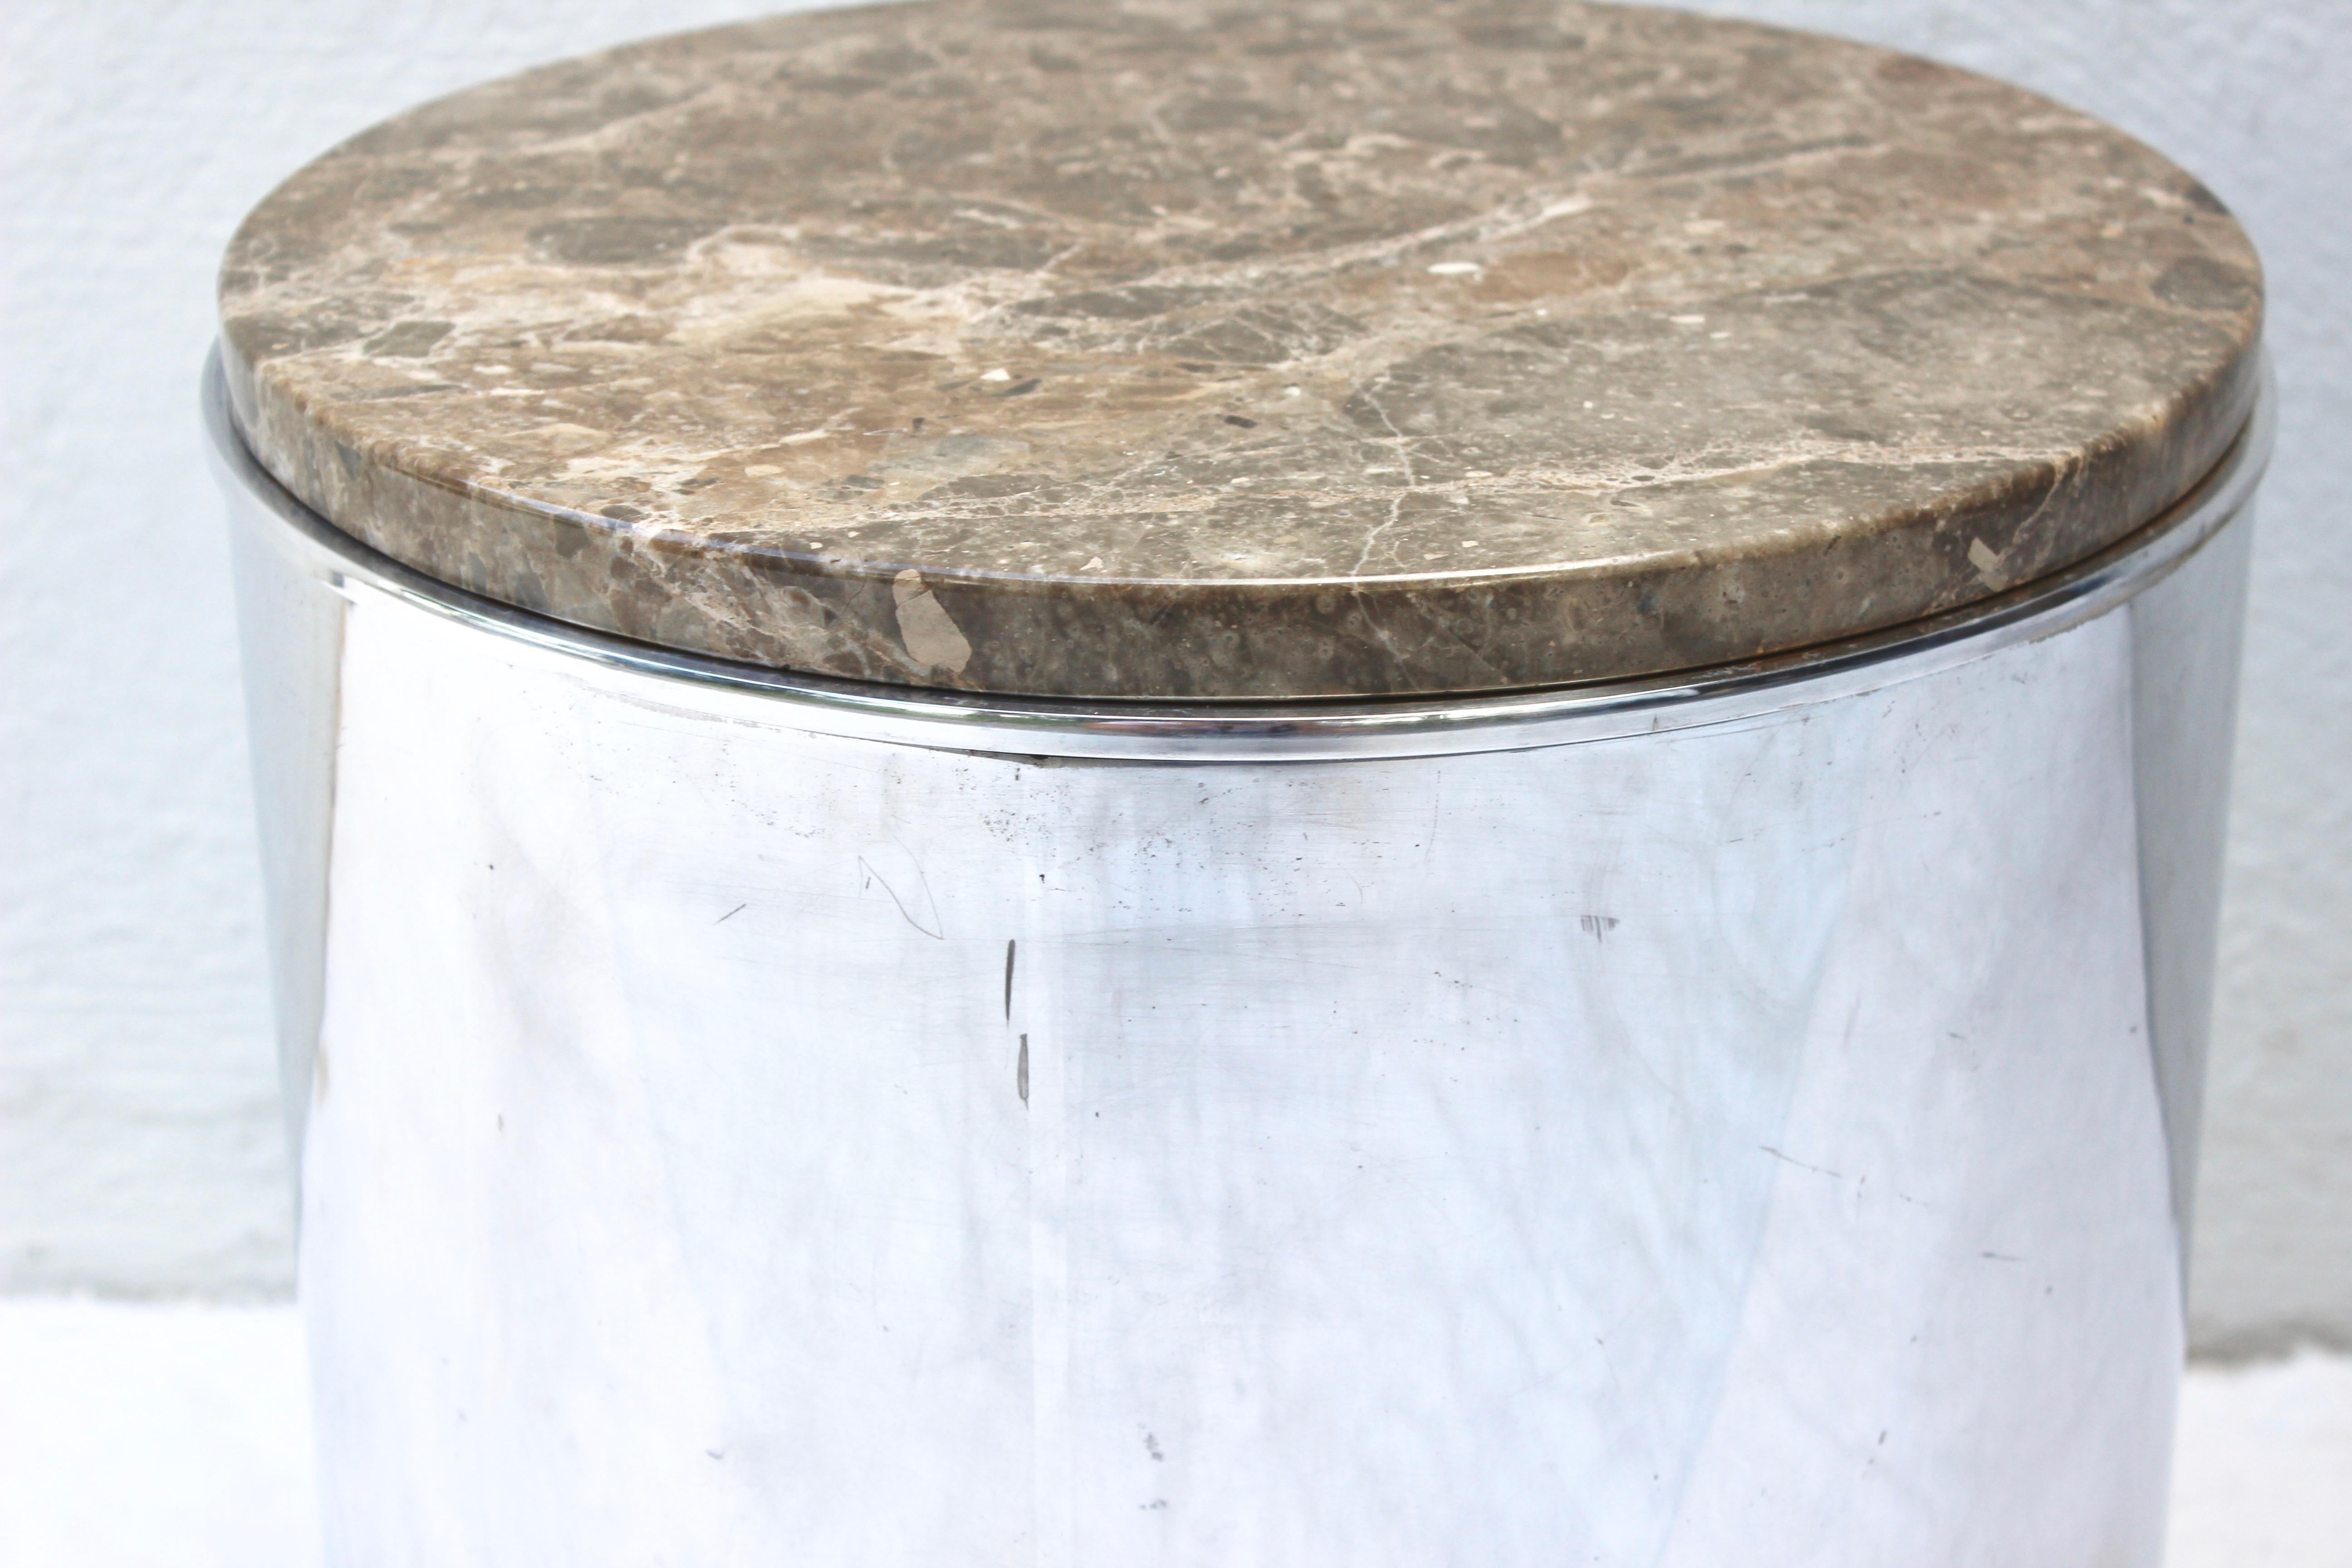 Polished steel and marble drum tables by Paul Mayen for Habitat.